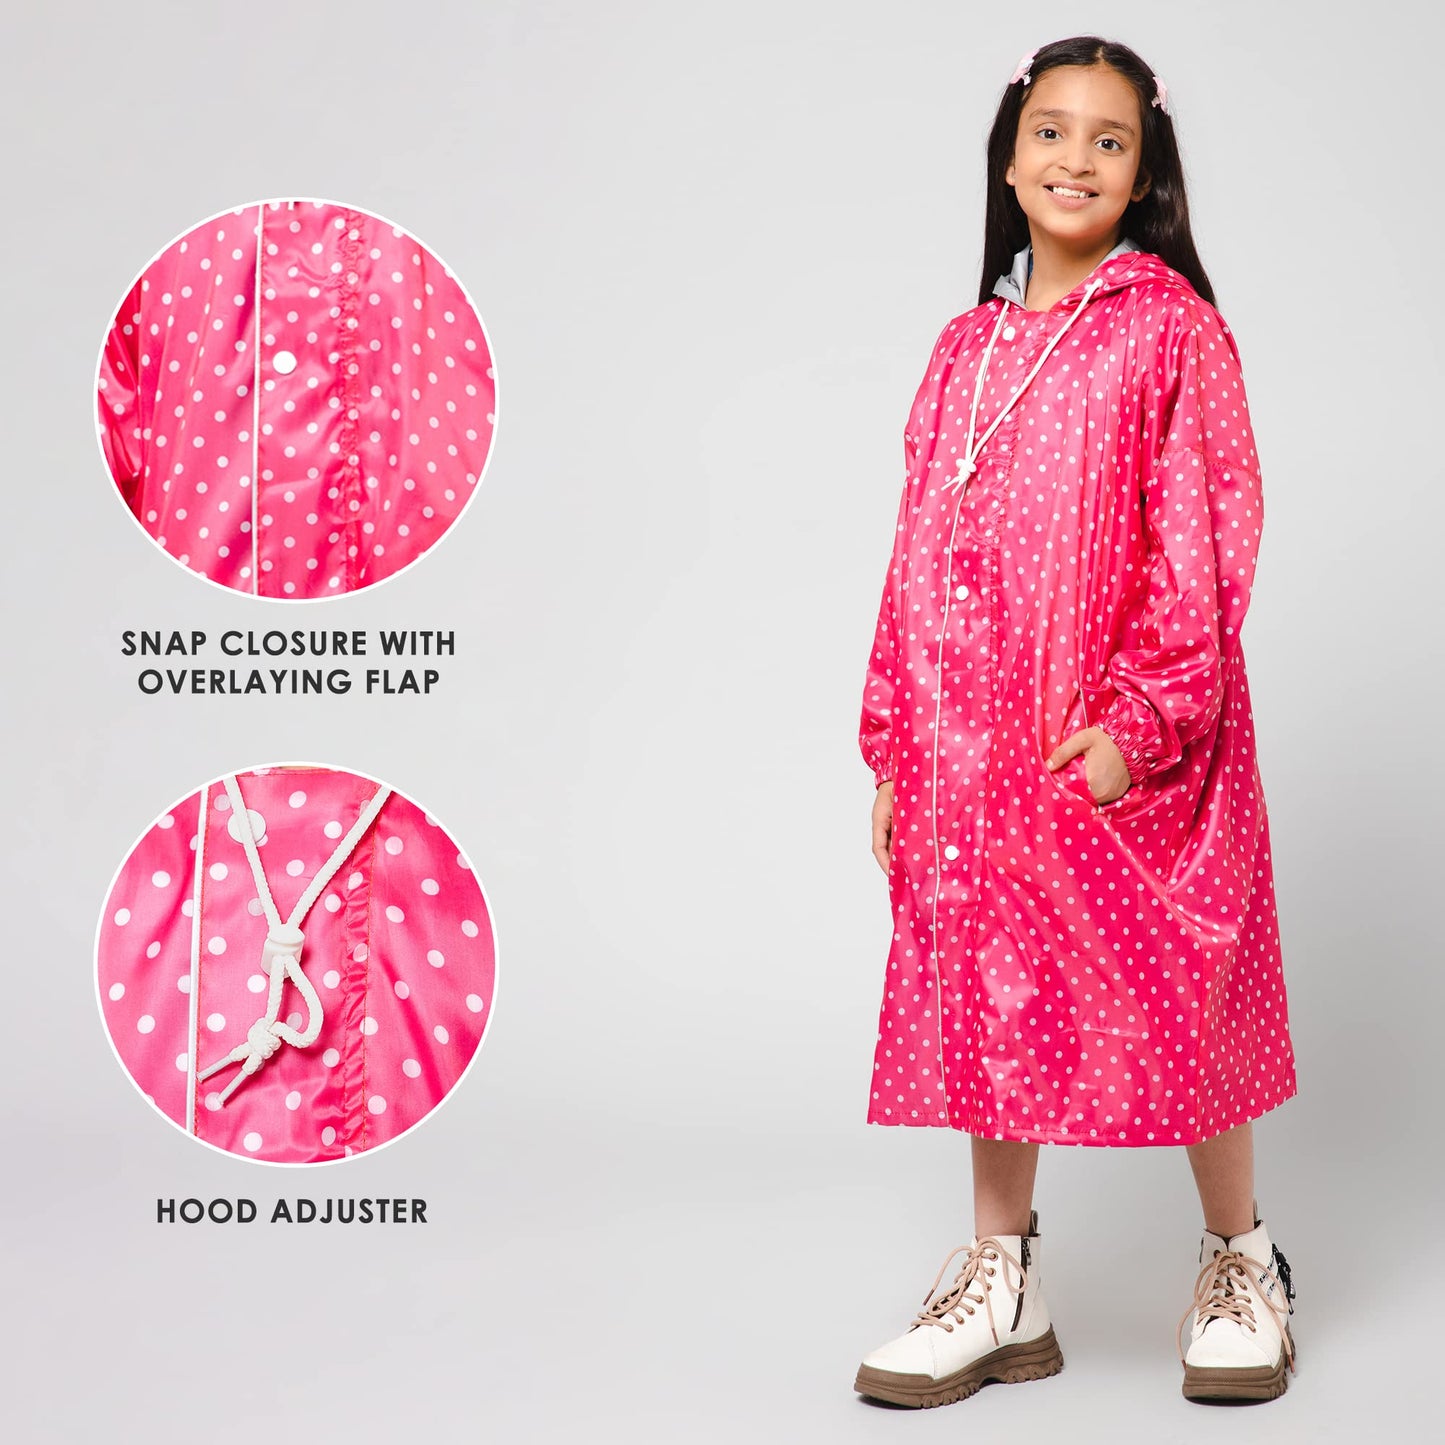 The Clownfish Drizzle Dot Series Kids Raincoat Waterproof Polyester Double Coating Reversible Longcoat with Hood and Reflector Logo at Back. Printed Plastic Pouch. Kid Age-11-12 years (Bubblegum Pink)